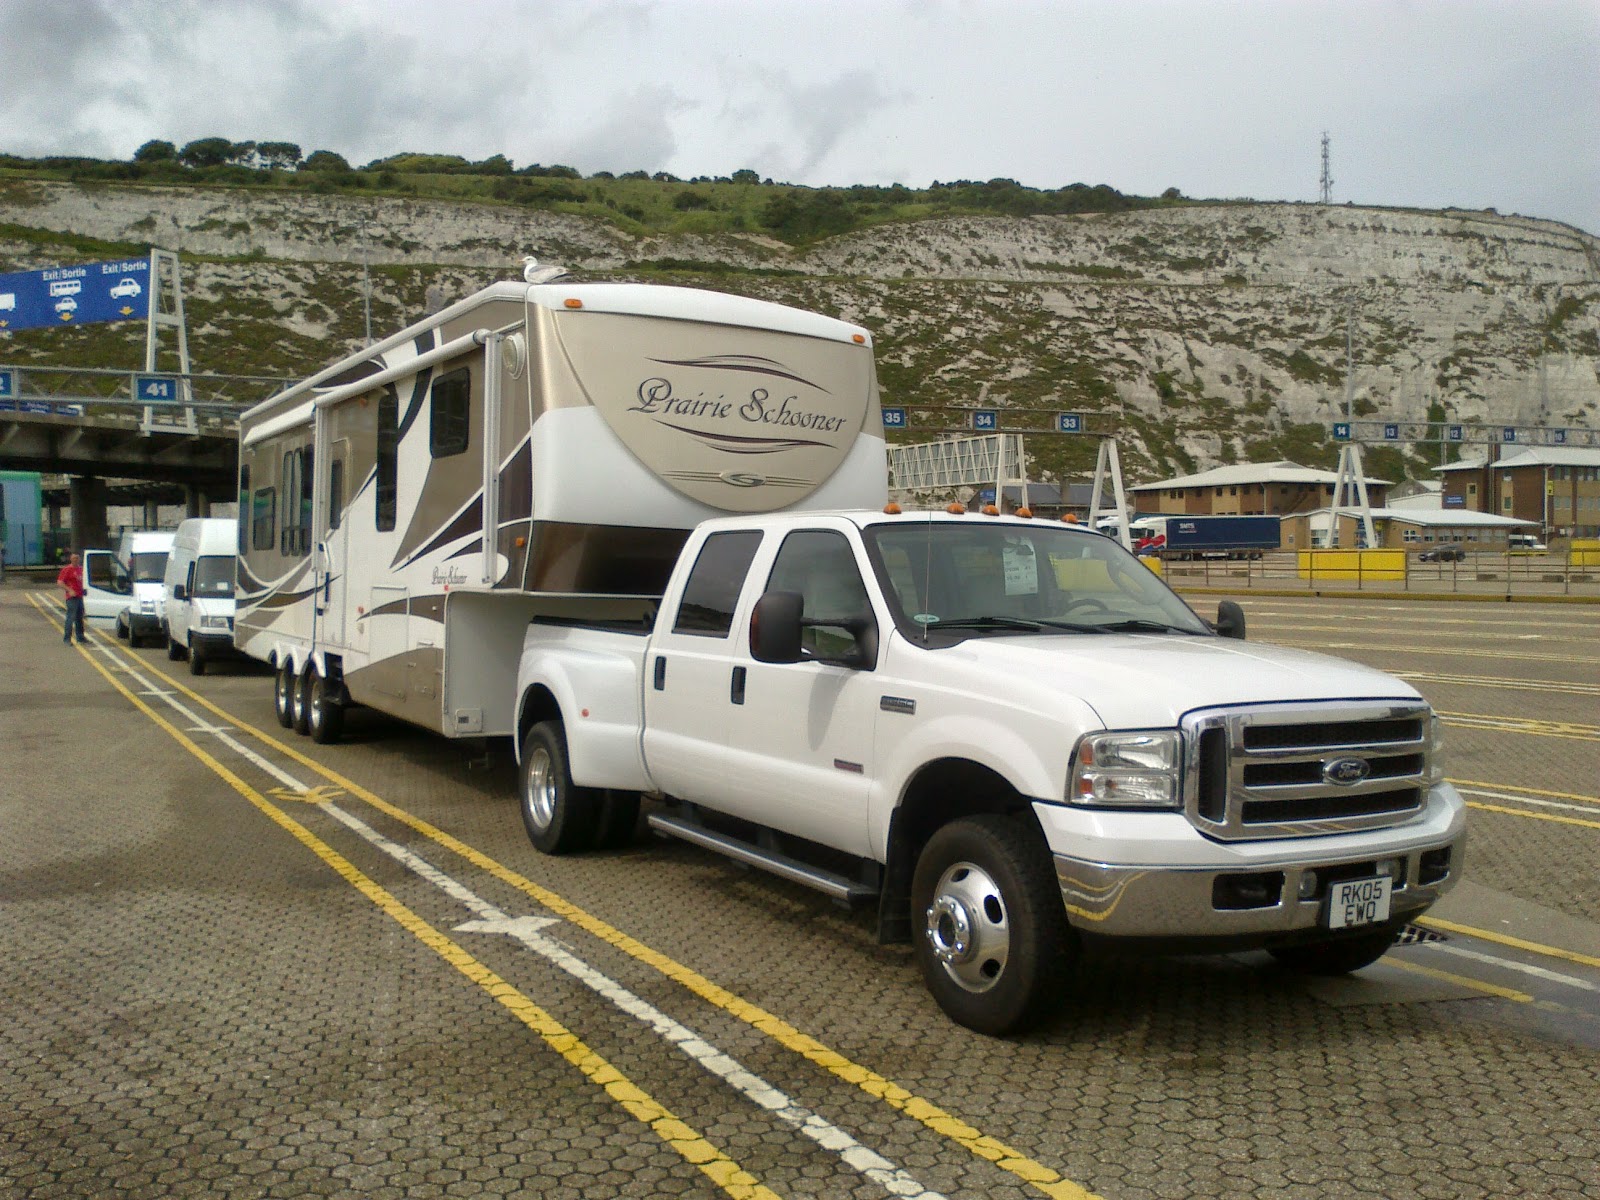 Towing a 5th wheel to France